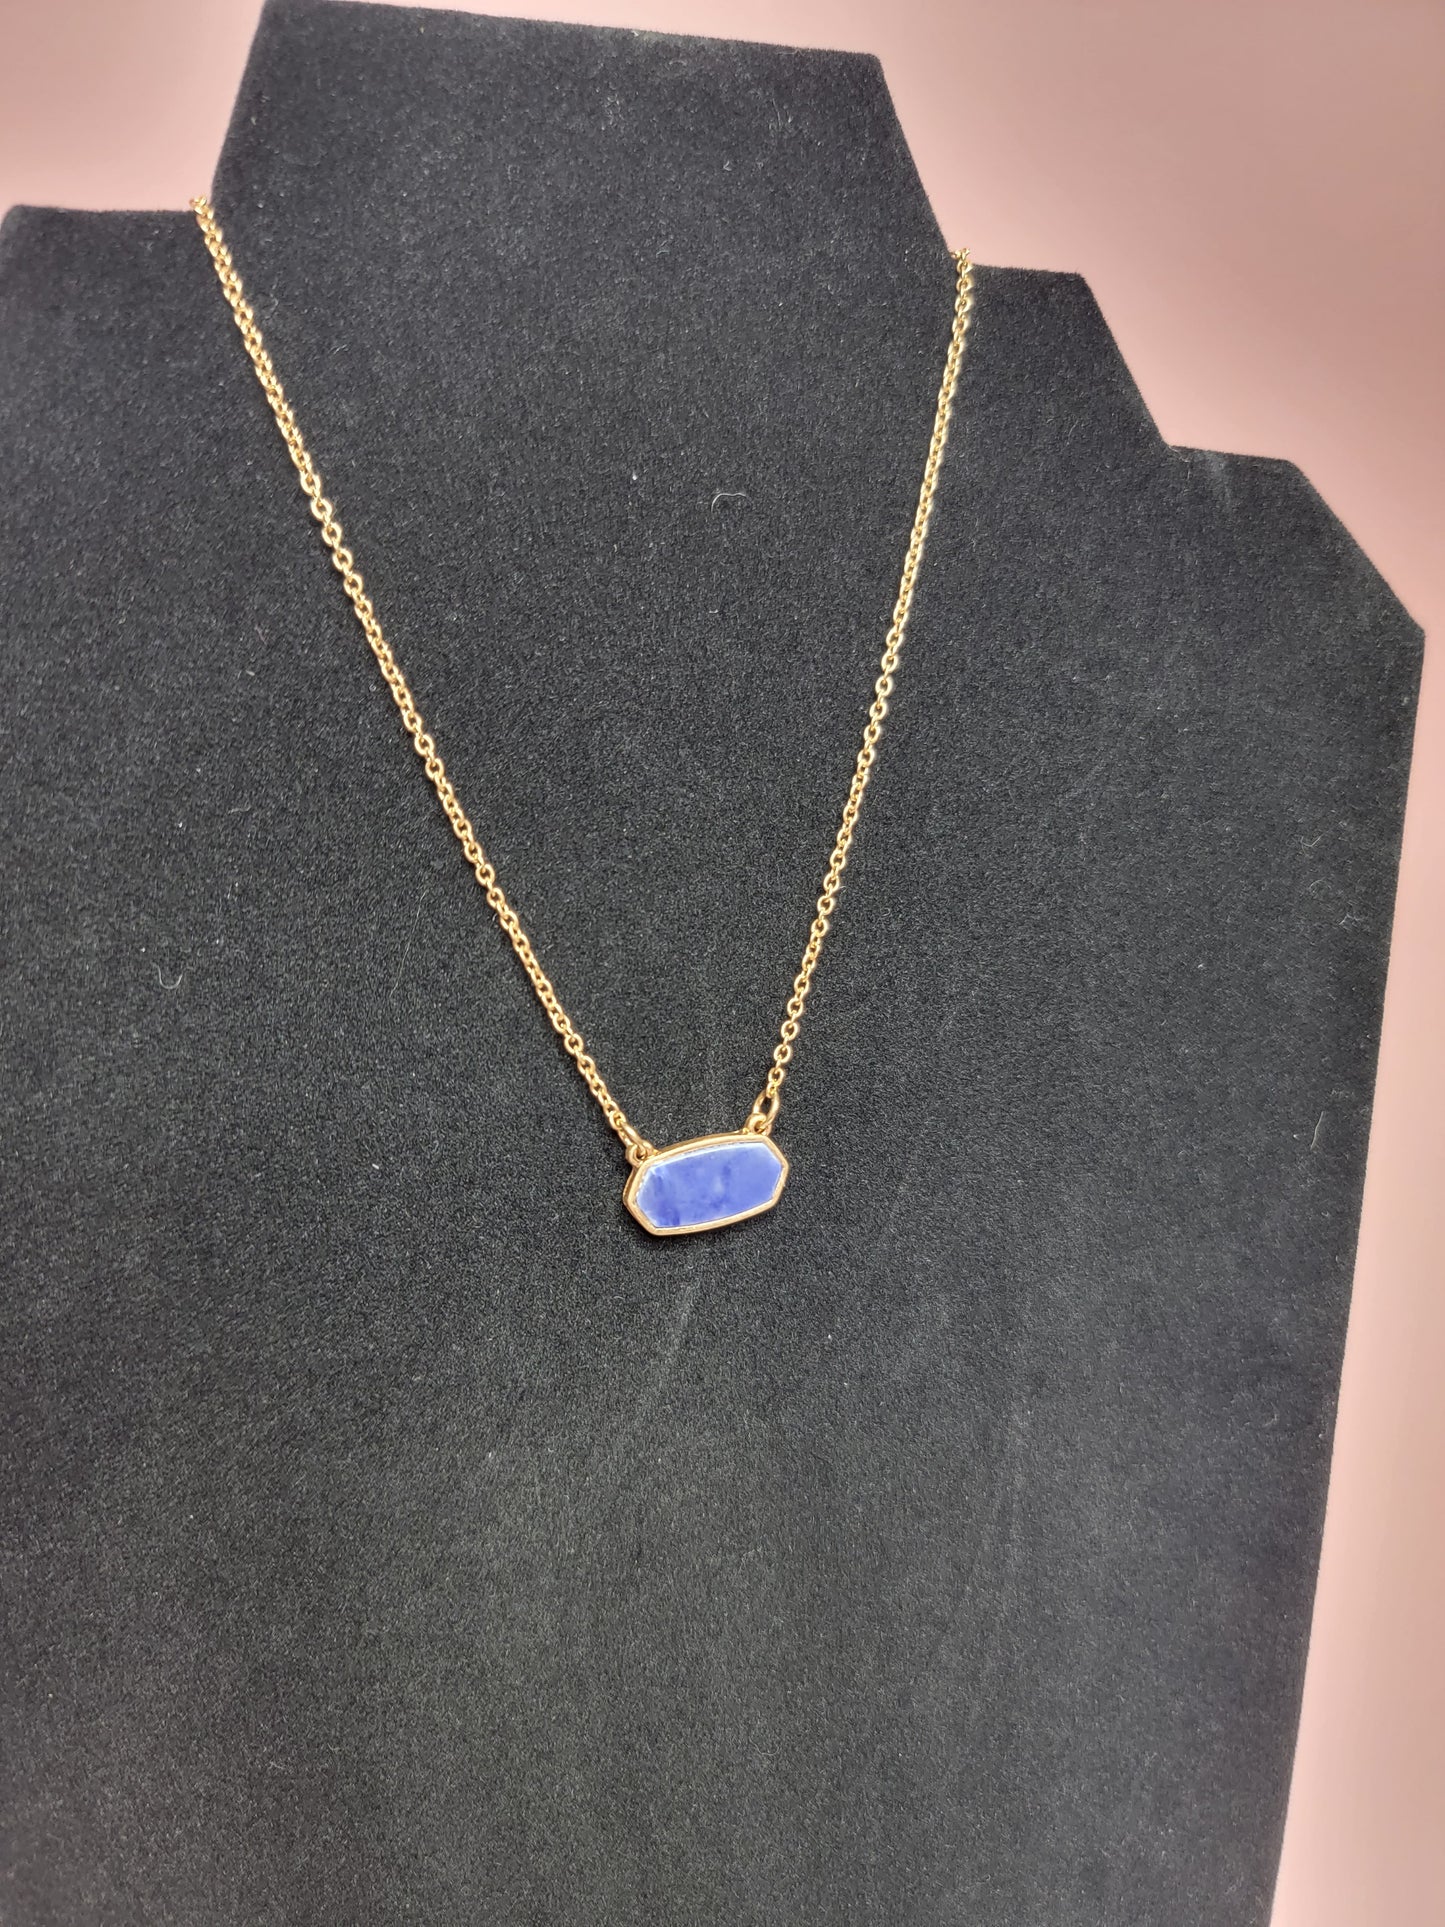 Blue Stone Gold Necklace